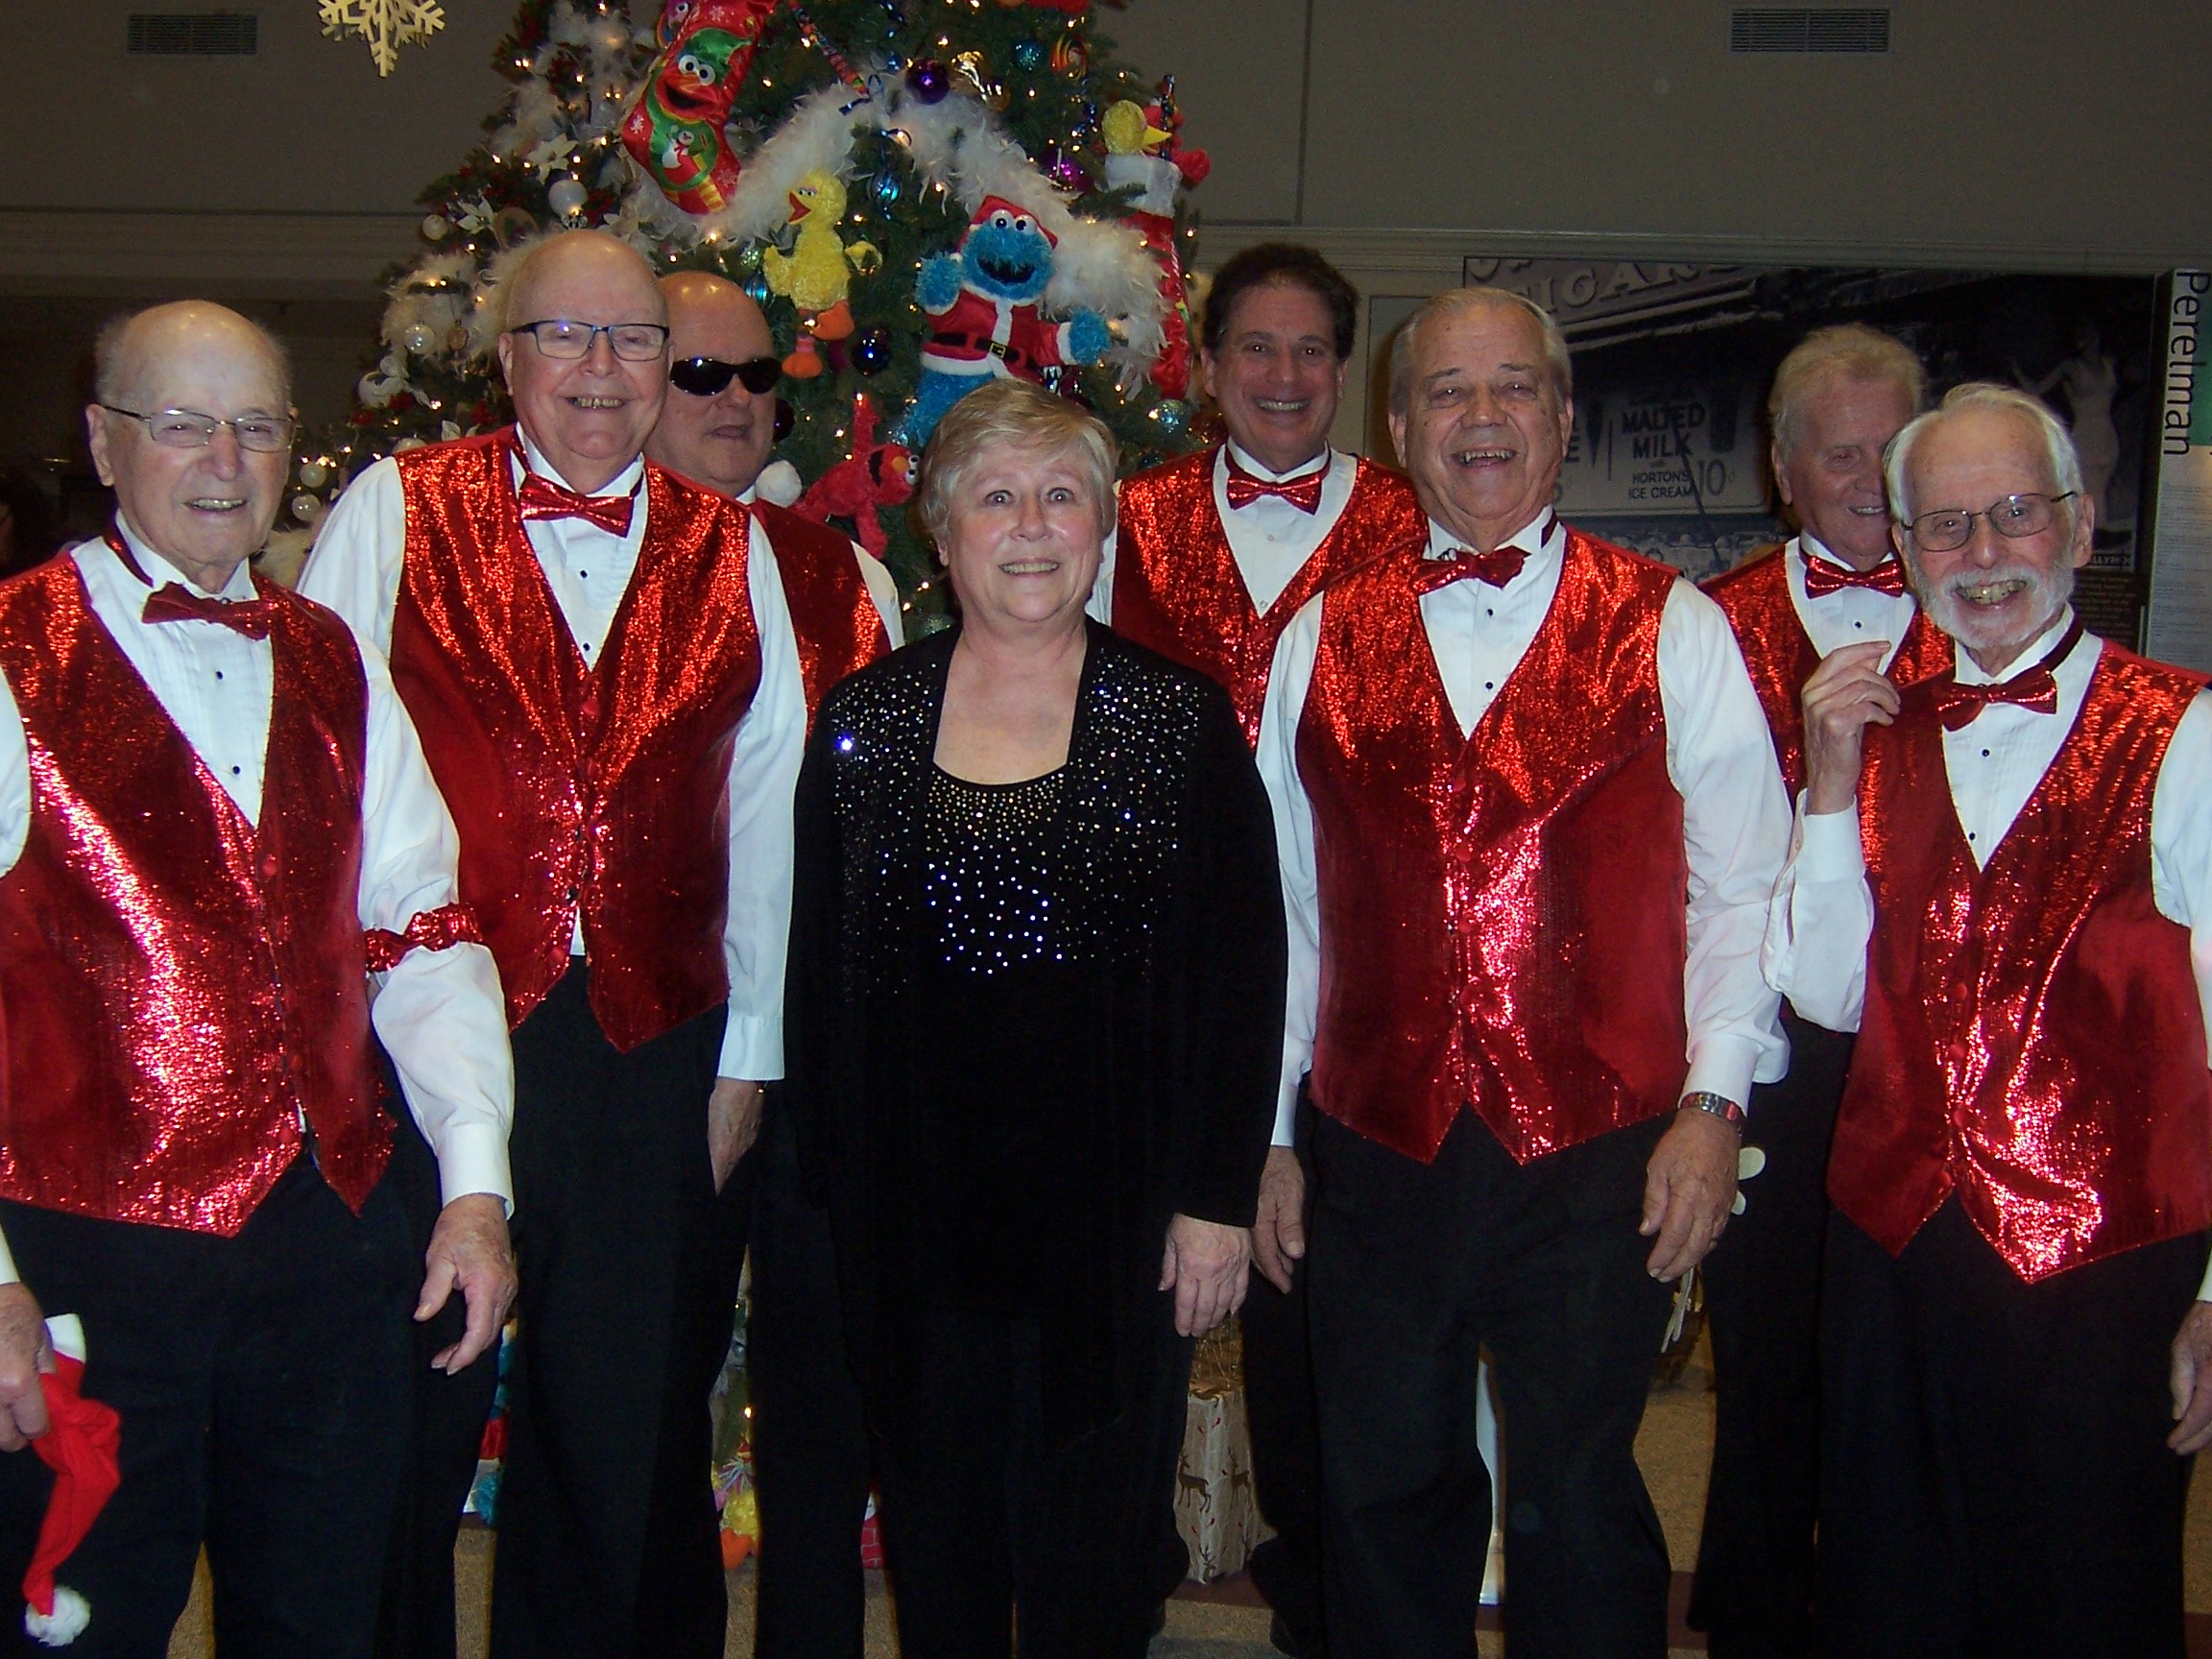 Group photo of the chorus, onstage, in festive attire (1 of 2)